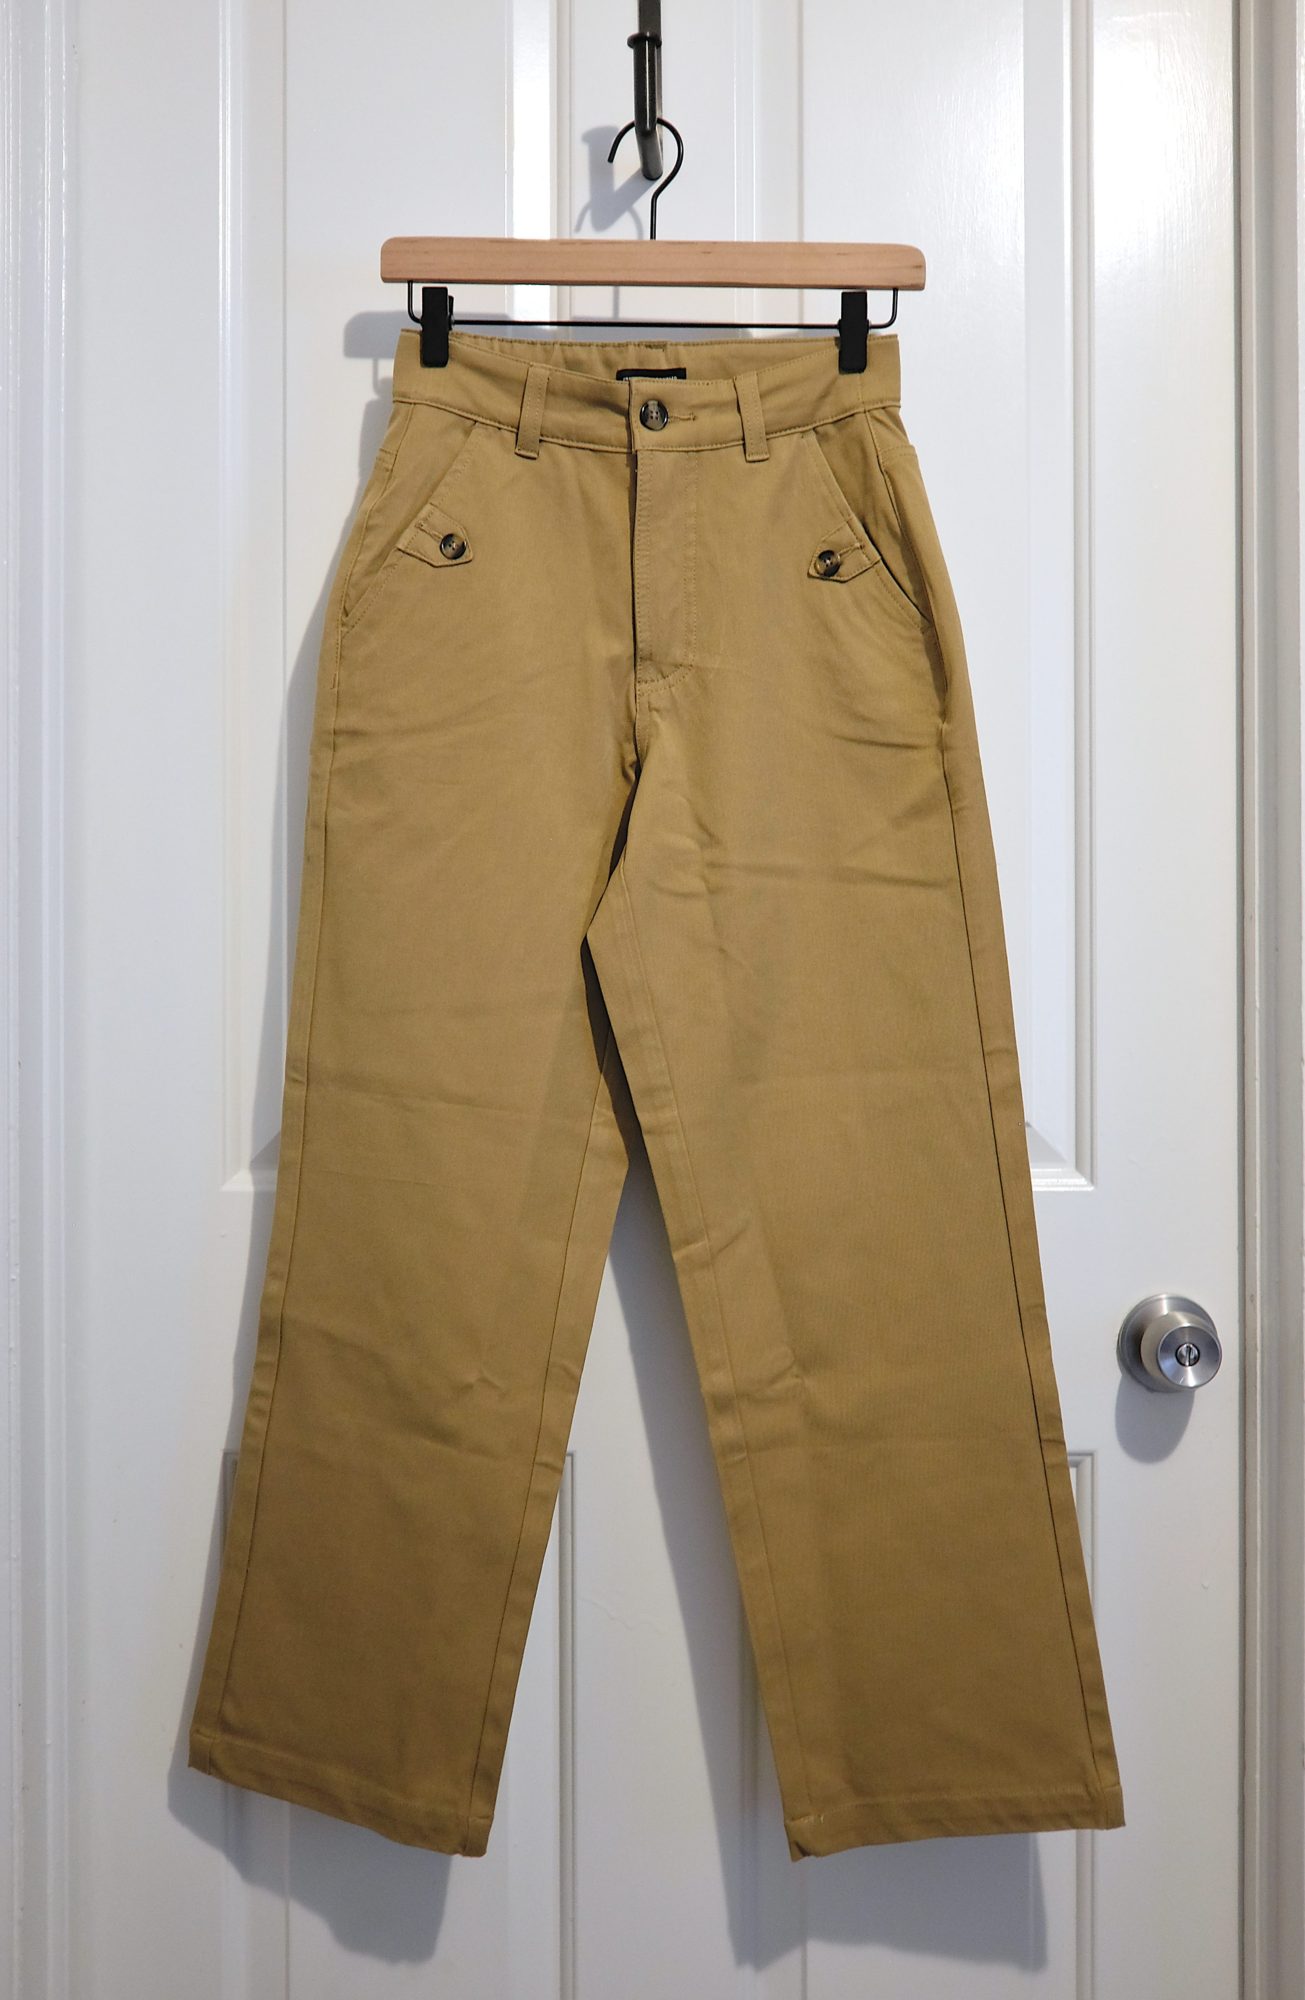 The Casual Stretch Twill Pants hang on a hanger